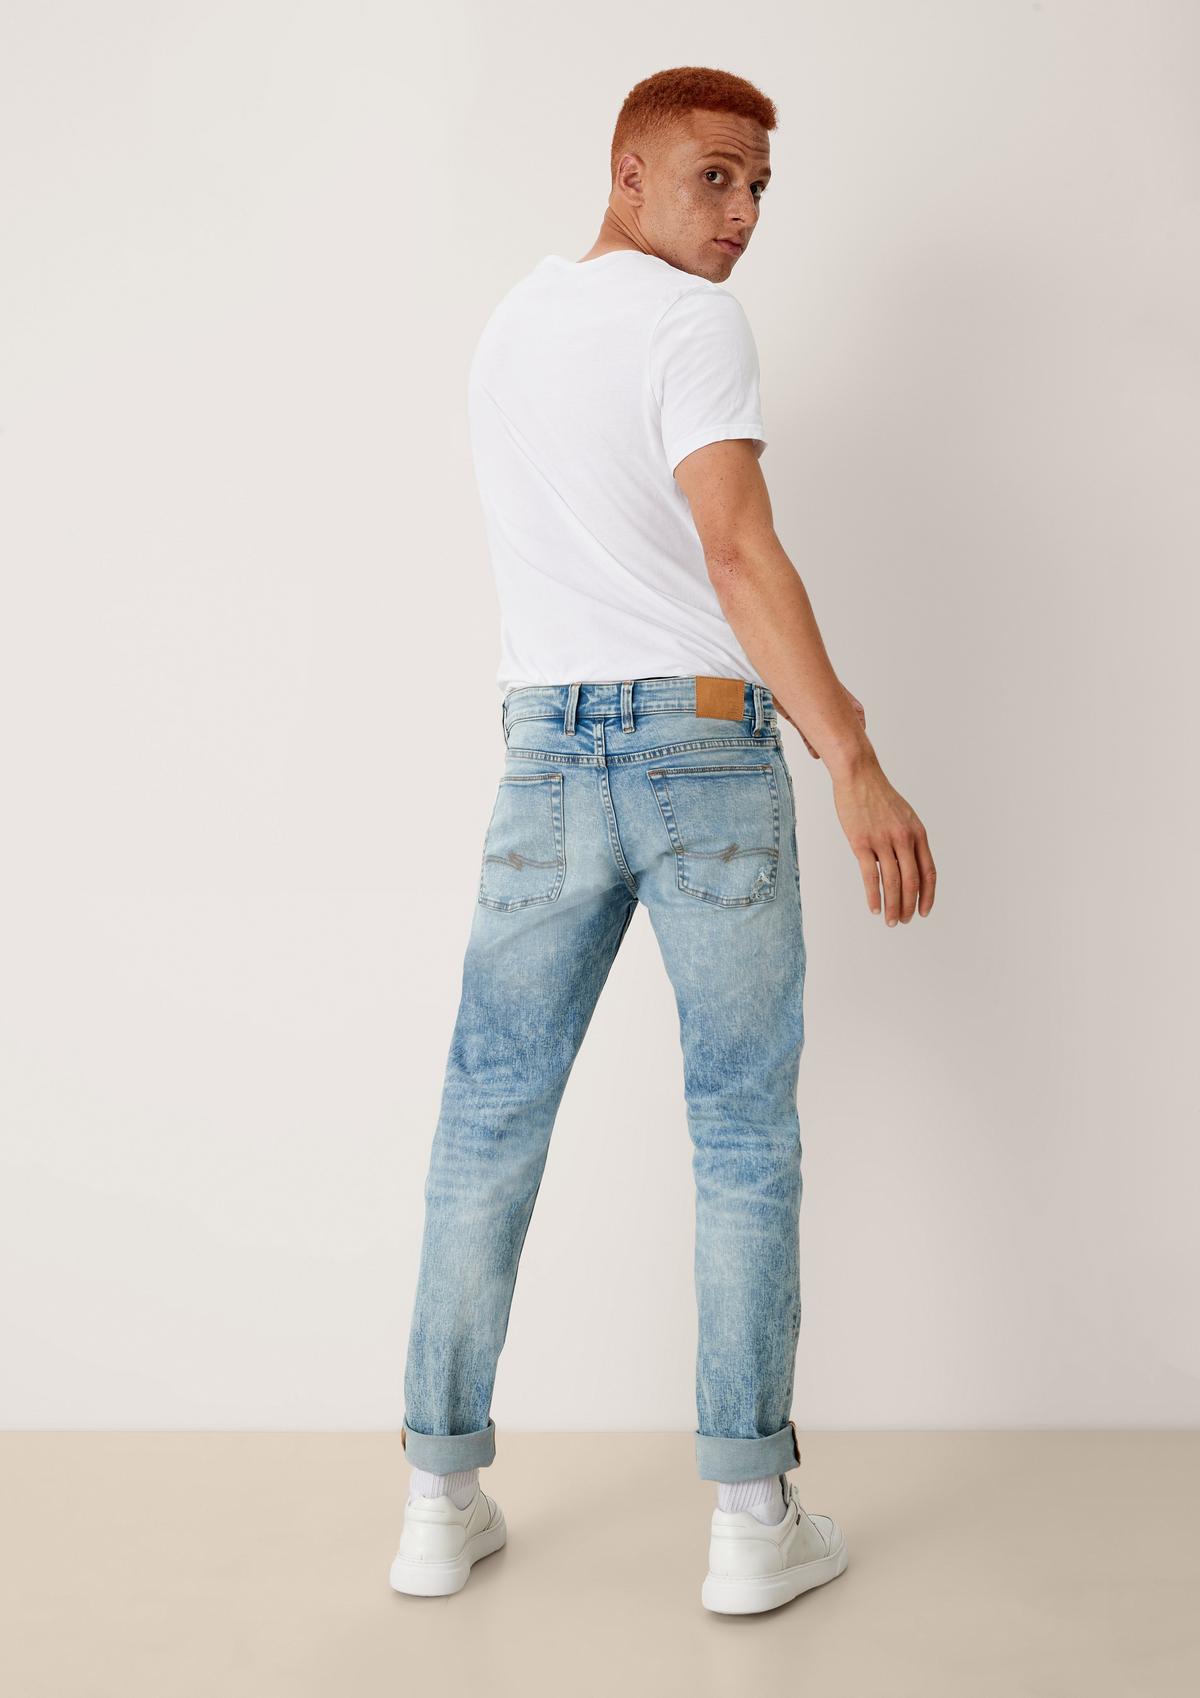 s.Oliver Jeans Pete / regular fit / mid rise / straight leg / label